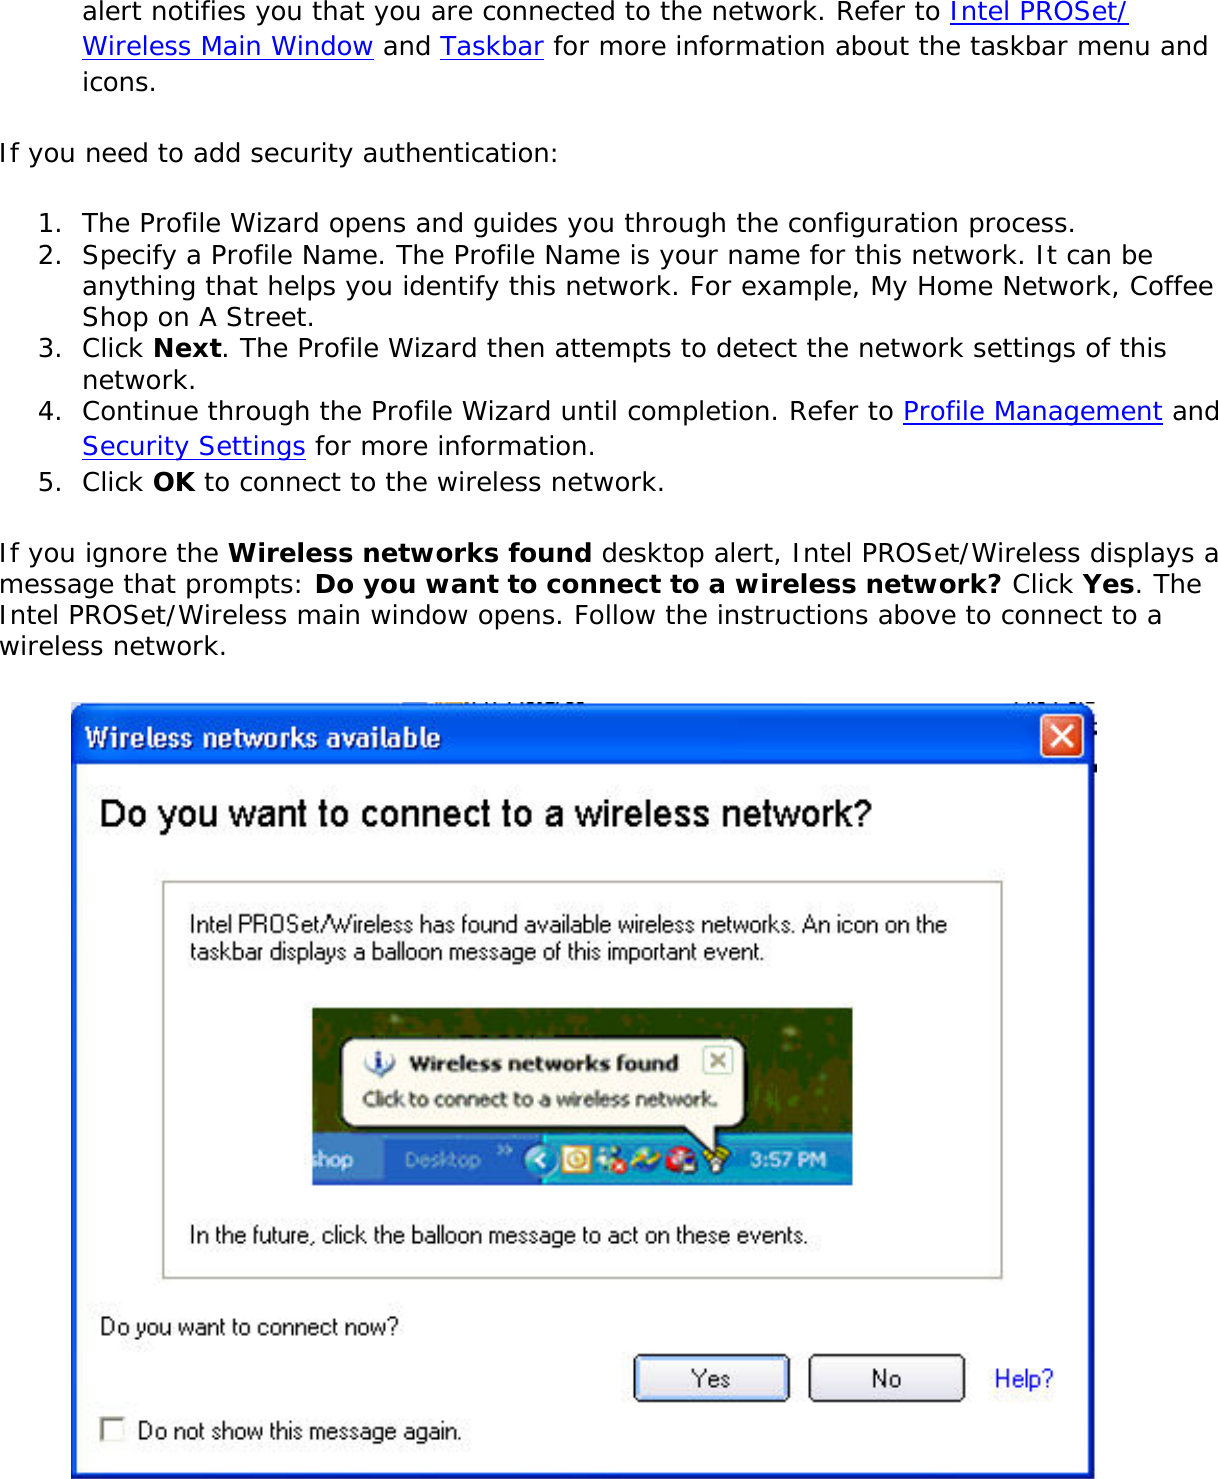 alert notifies you that you are connected to the network. Refer to Intel PROSet/Wireless Main Window and Taskbar for more information about the taskbar menu and icons. If you need to add security authentication: 1.  The Profile Wizard opens and guides you through the configuration process. 2.  Specify a Profile Name. The Profile Name is your name for this network. It can be anything that helps you identify this network. For example, My Home Network, Coffee Shop on A Street. 3.  Click Next. The Profile Wizard then attempts to detect the network settings of this network. 4.  Continue through the Profile Wizard until completion. Refer to Profile Management and Security Settings for more information. 5.  Click OK to connect to the wireless network. If you ignore the Wireless networks found desktop alert, Intel PROSet/Wireless displays a message that prompts: Do you want to connect to a wireless network? Click Yes. The Intel PROSet/Wireless main window opens. Follow the instructions above to connect to a wireless network.  